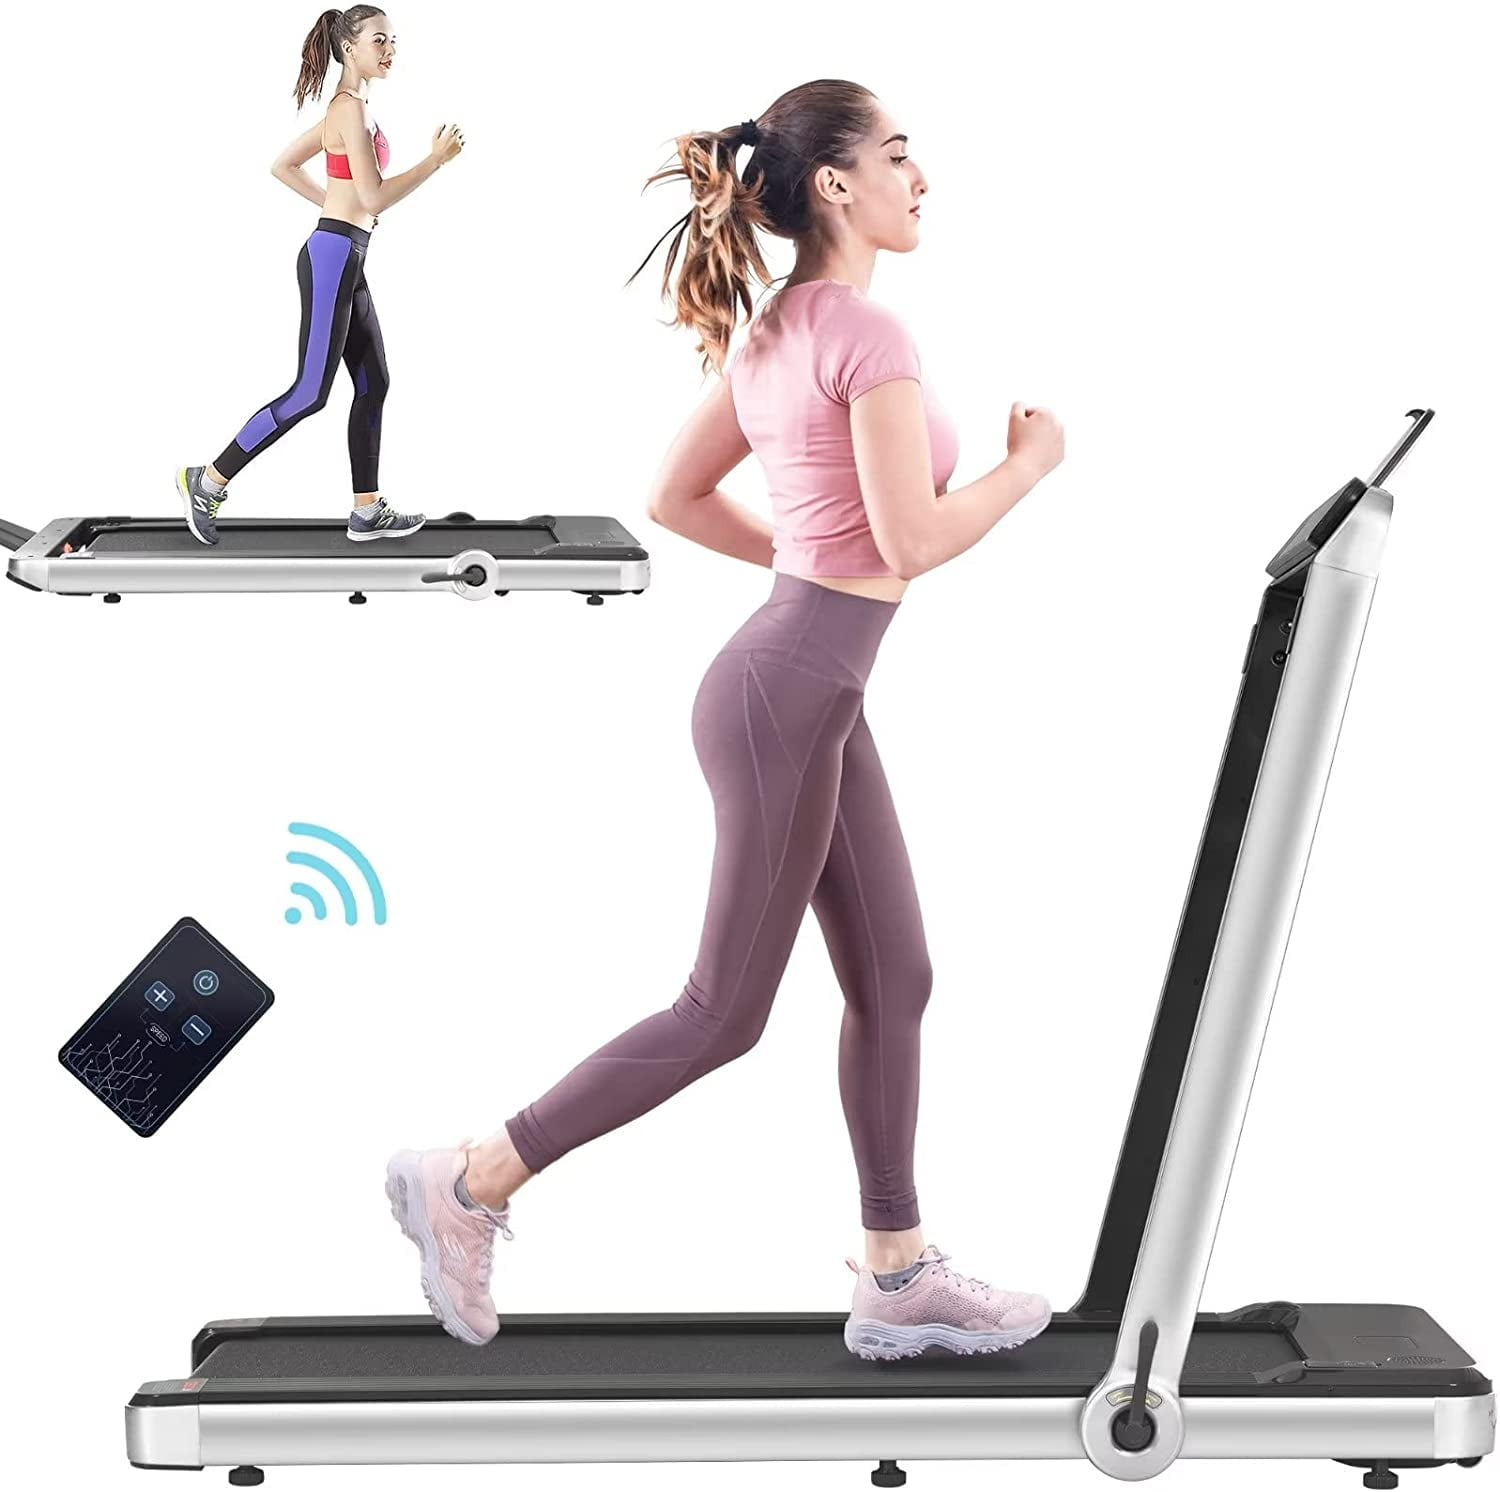 Installation-Free with Bluetooth Speaker Remote Control and LED Display 2 in 1 Folding Treadmill: Multi-Function Under Desk Electric Treadmill Walking Jogging for Home 